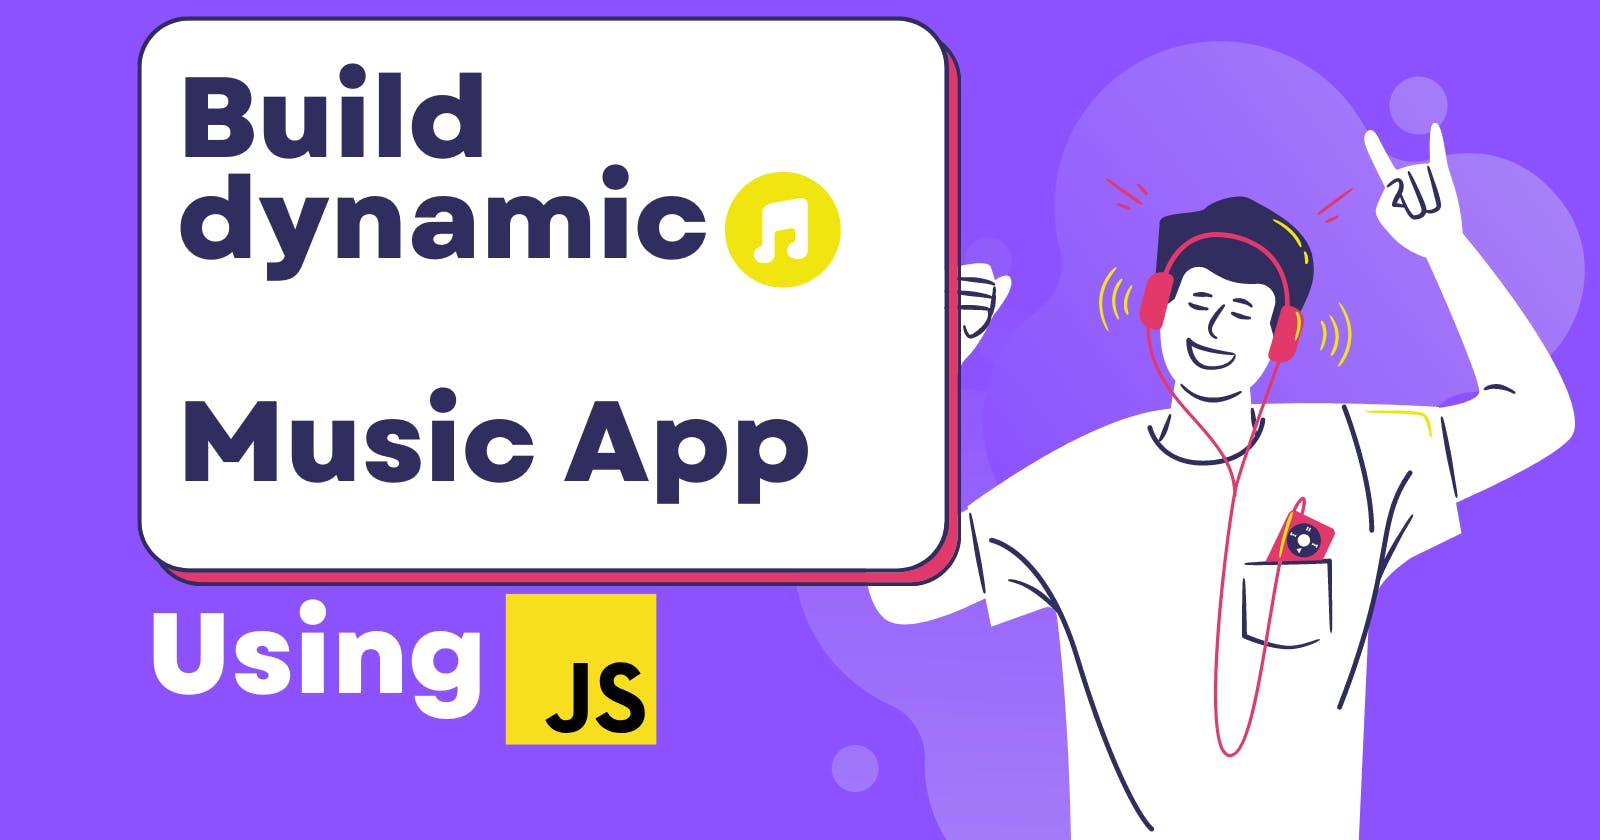 How to Build a Dynamic Music App Using JavaScript